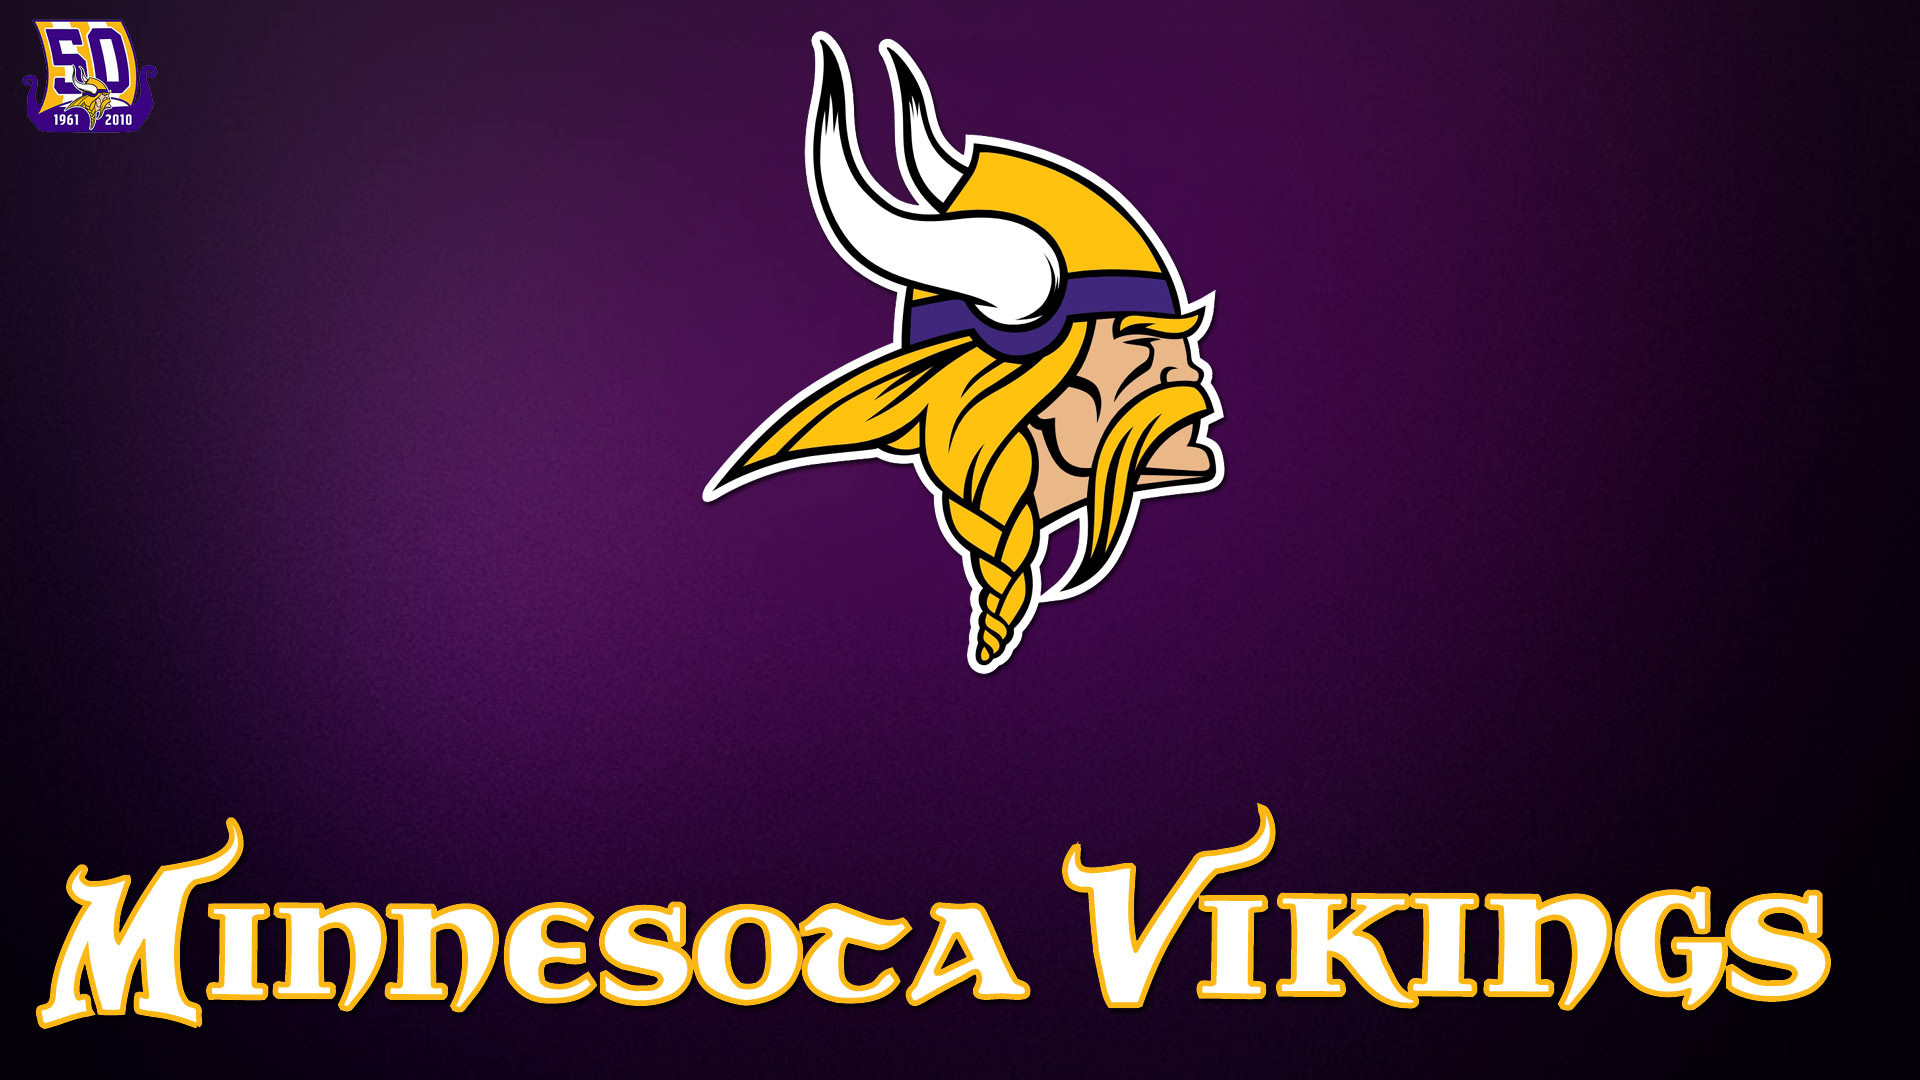 1920x1080 Download free minnesota vikings wallpapers for your mobile phone | HD  Wallpapers | Pinterest | Vikings, Hd wallpaper and Wallpaper